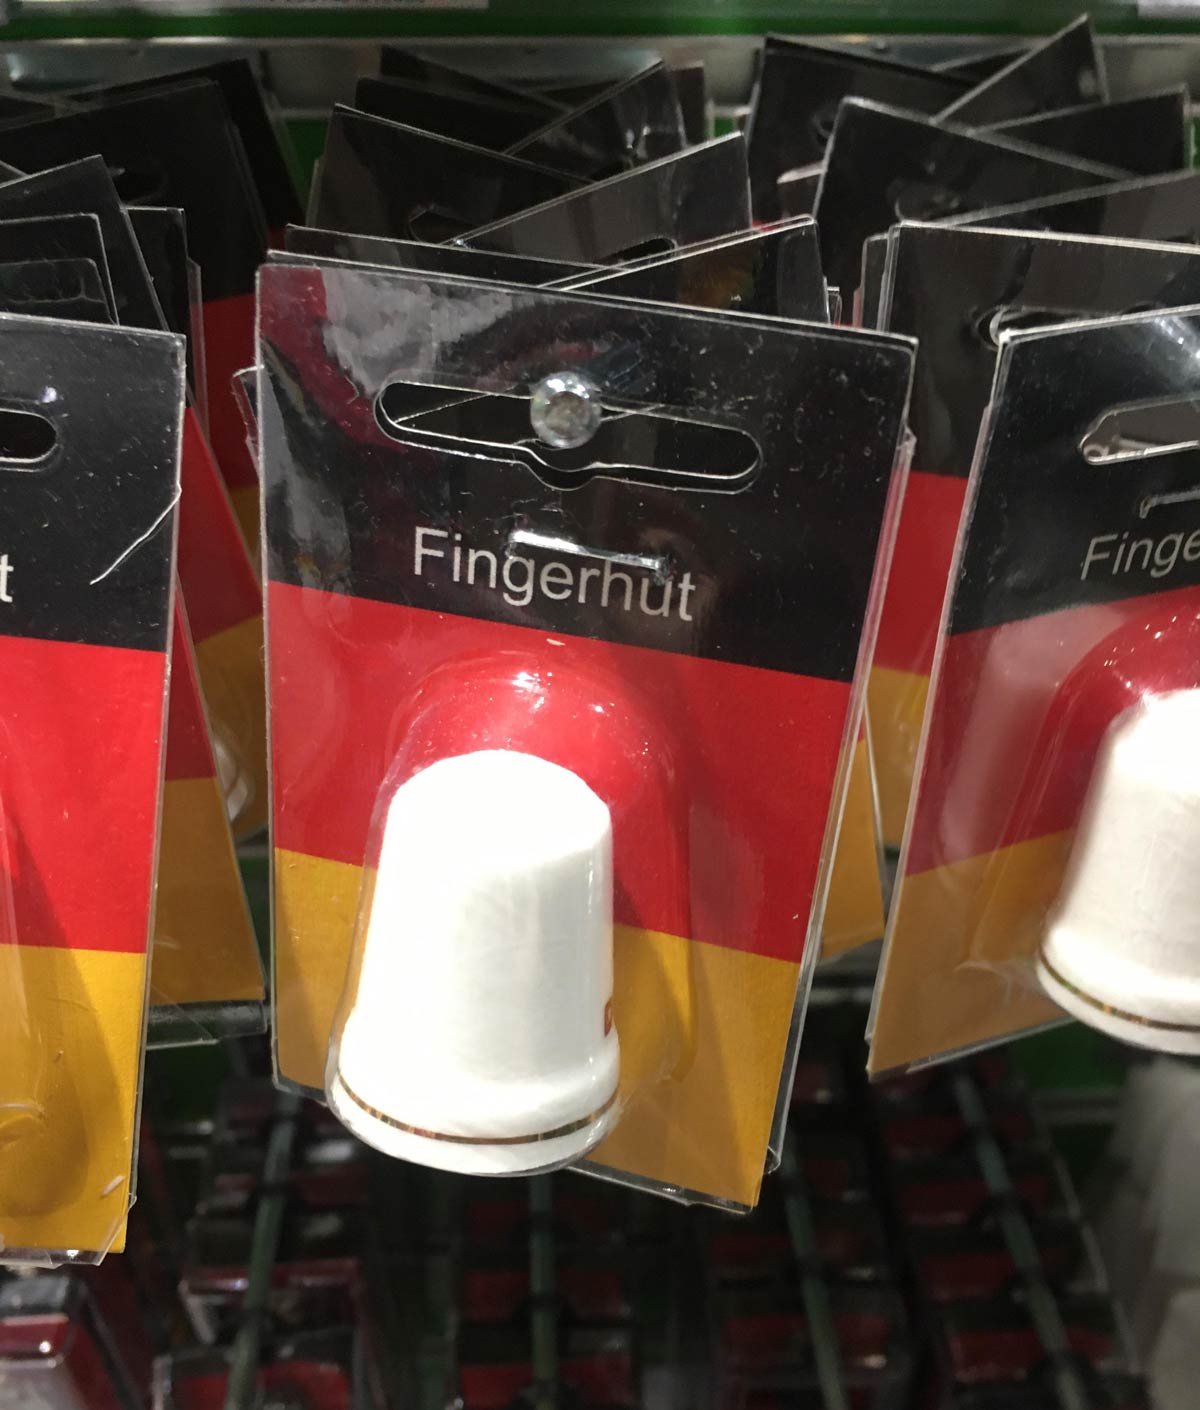 In case you were wondering how to say thimble in German